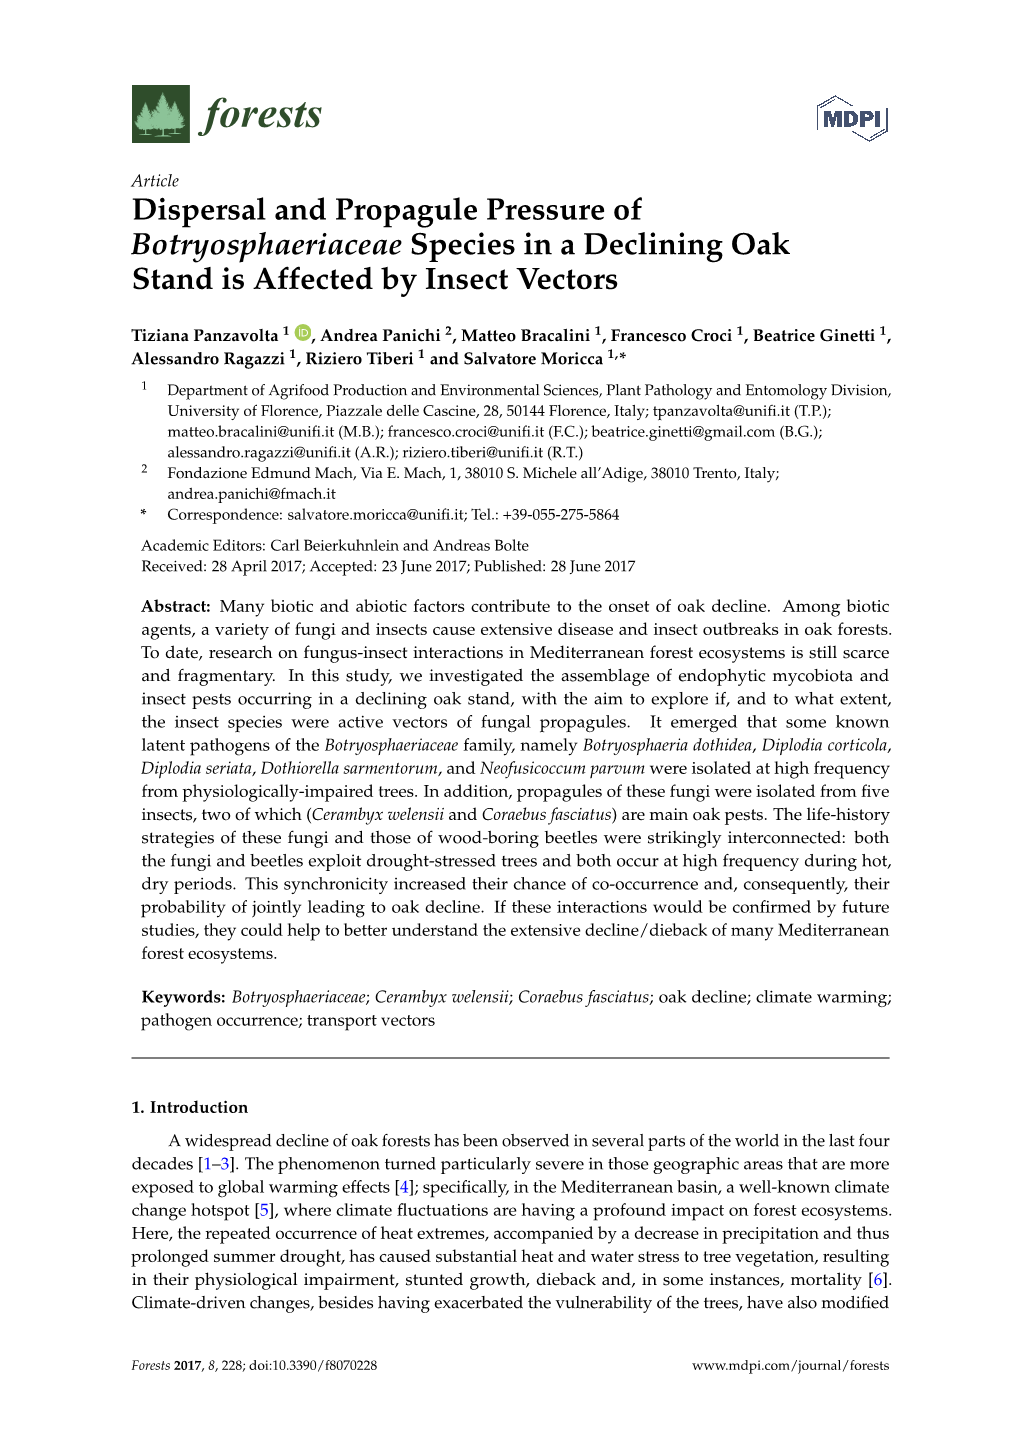 Dispersal and Propagule Pressure of Botryosphaeriaceae Species in a Declining Oak Stand Is Affected by Insect Vectors